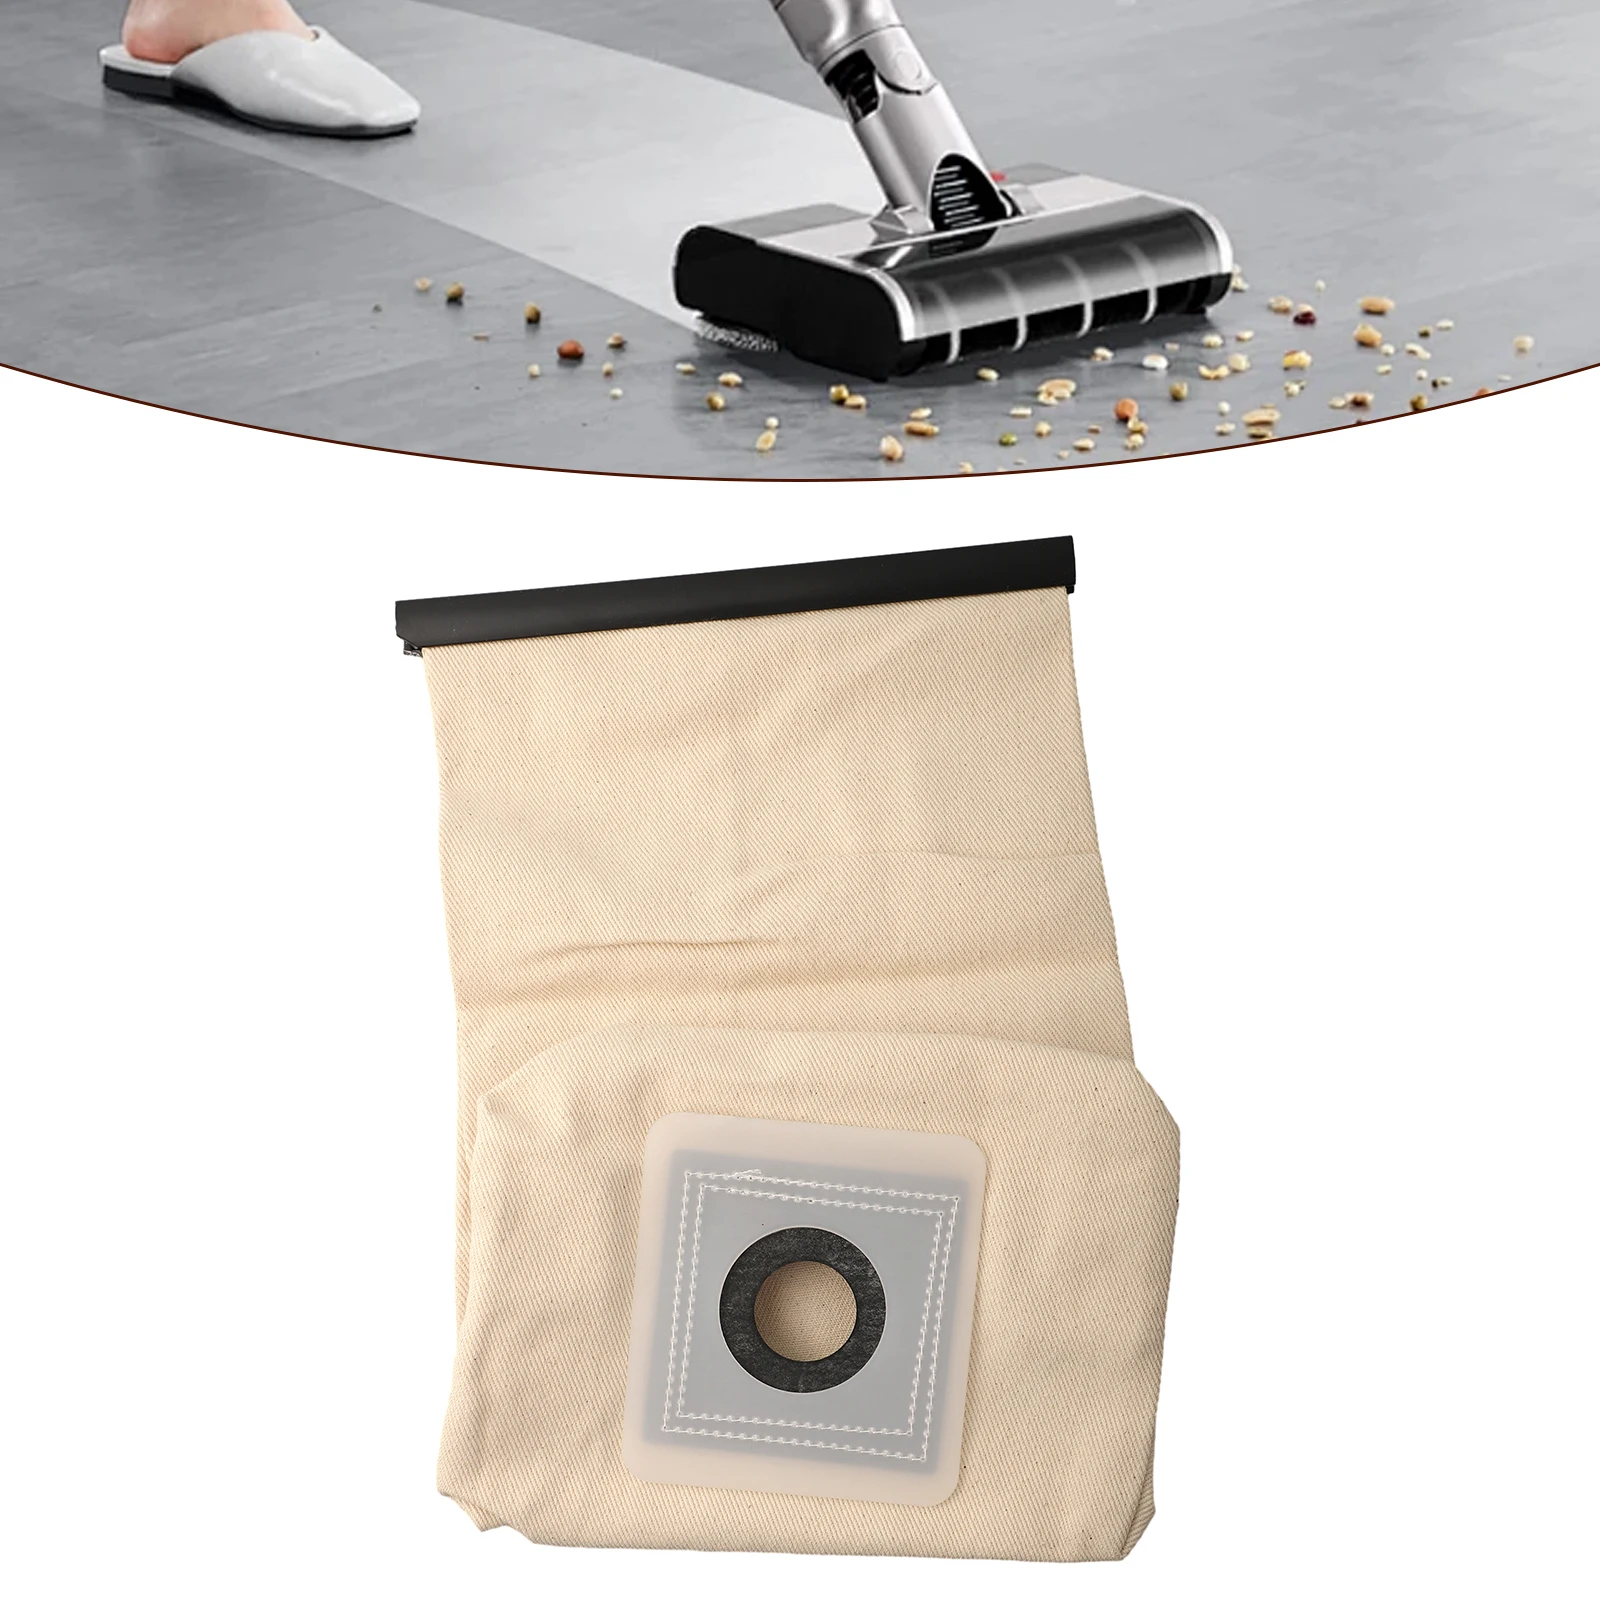 vacuum parts dust bags reusable dust 4 10 bag efficiently for midea v12 high quality robot v10 household supplies Vacuum Bags Dust Bag Reusable 95332110 9.533-211.0 Cleaning Tool For Hoover Filter Non-woven Dust Bag For Karcher